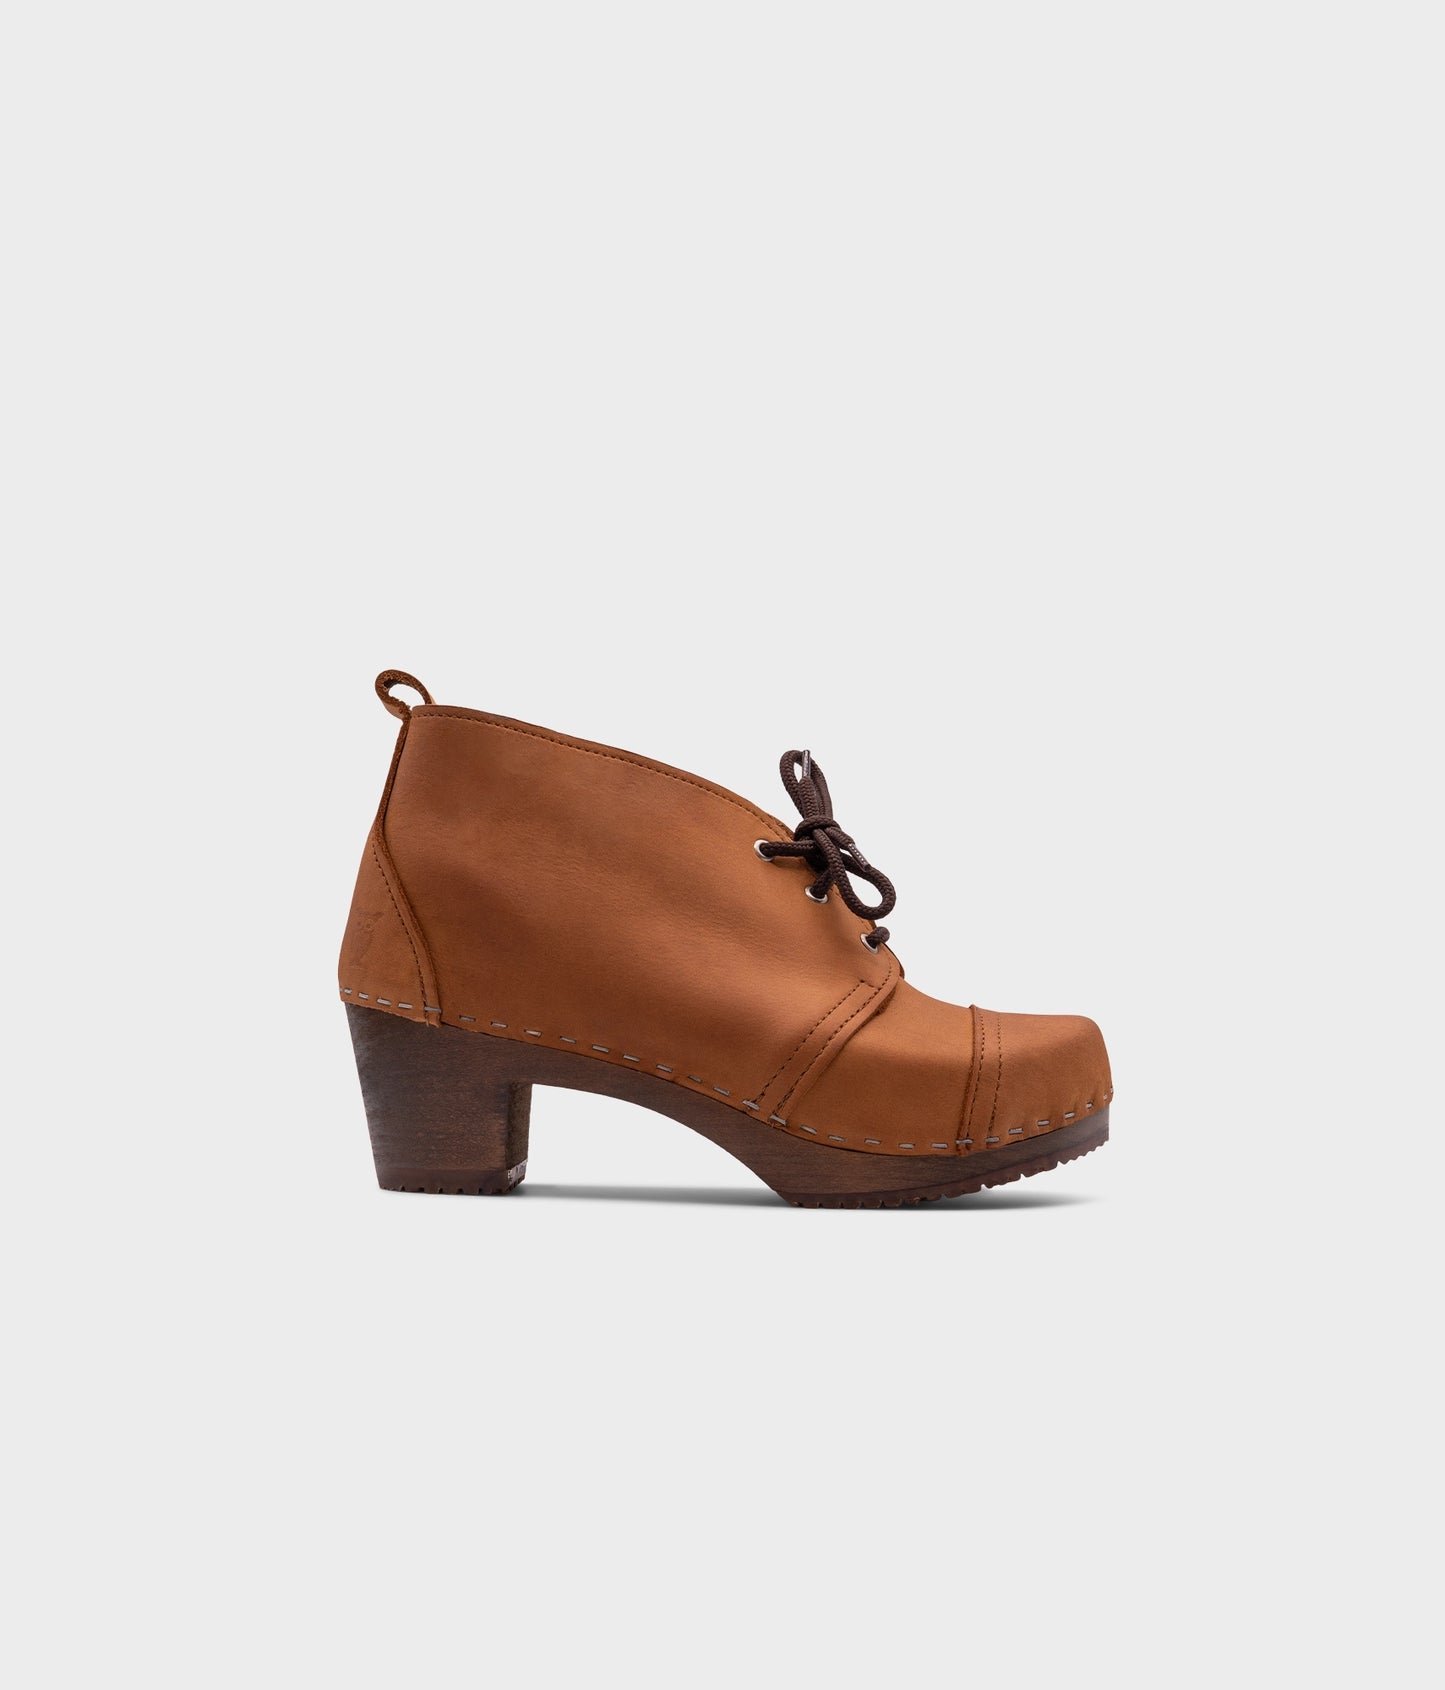 high heeled chukka clog boots in light brown nubuck leather stapled on a dark wooden base with brown laces